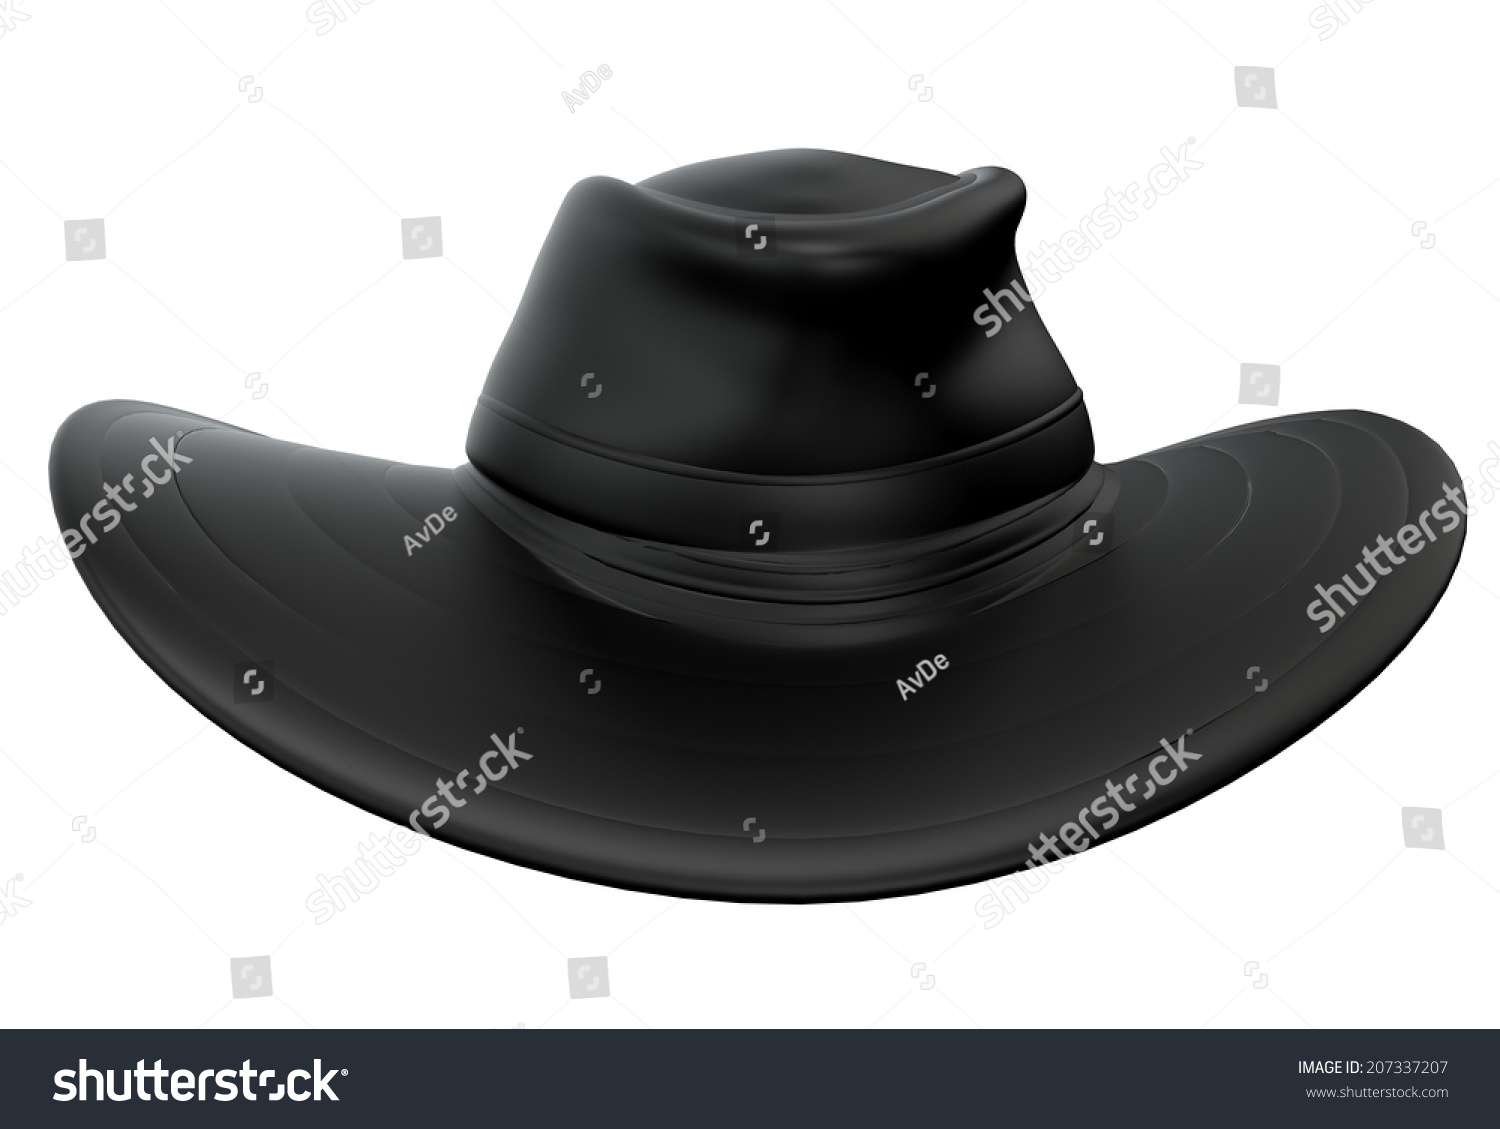 Black Hat Isolated Stock Photo 207337207 : Shutterstock